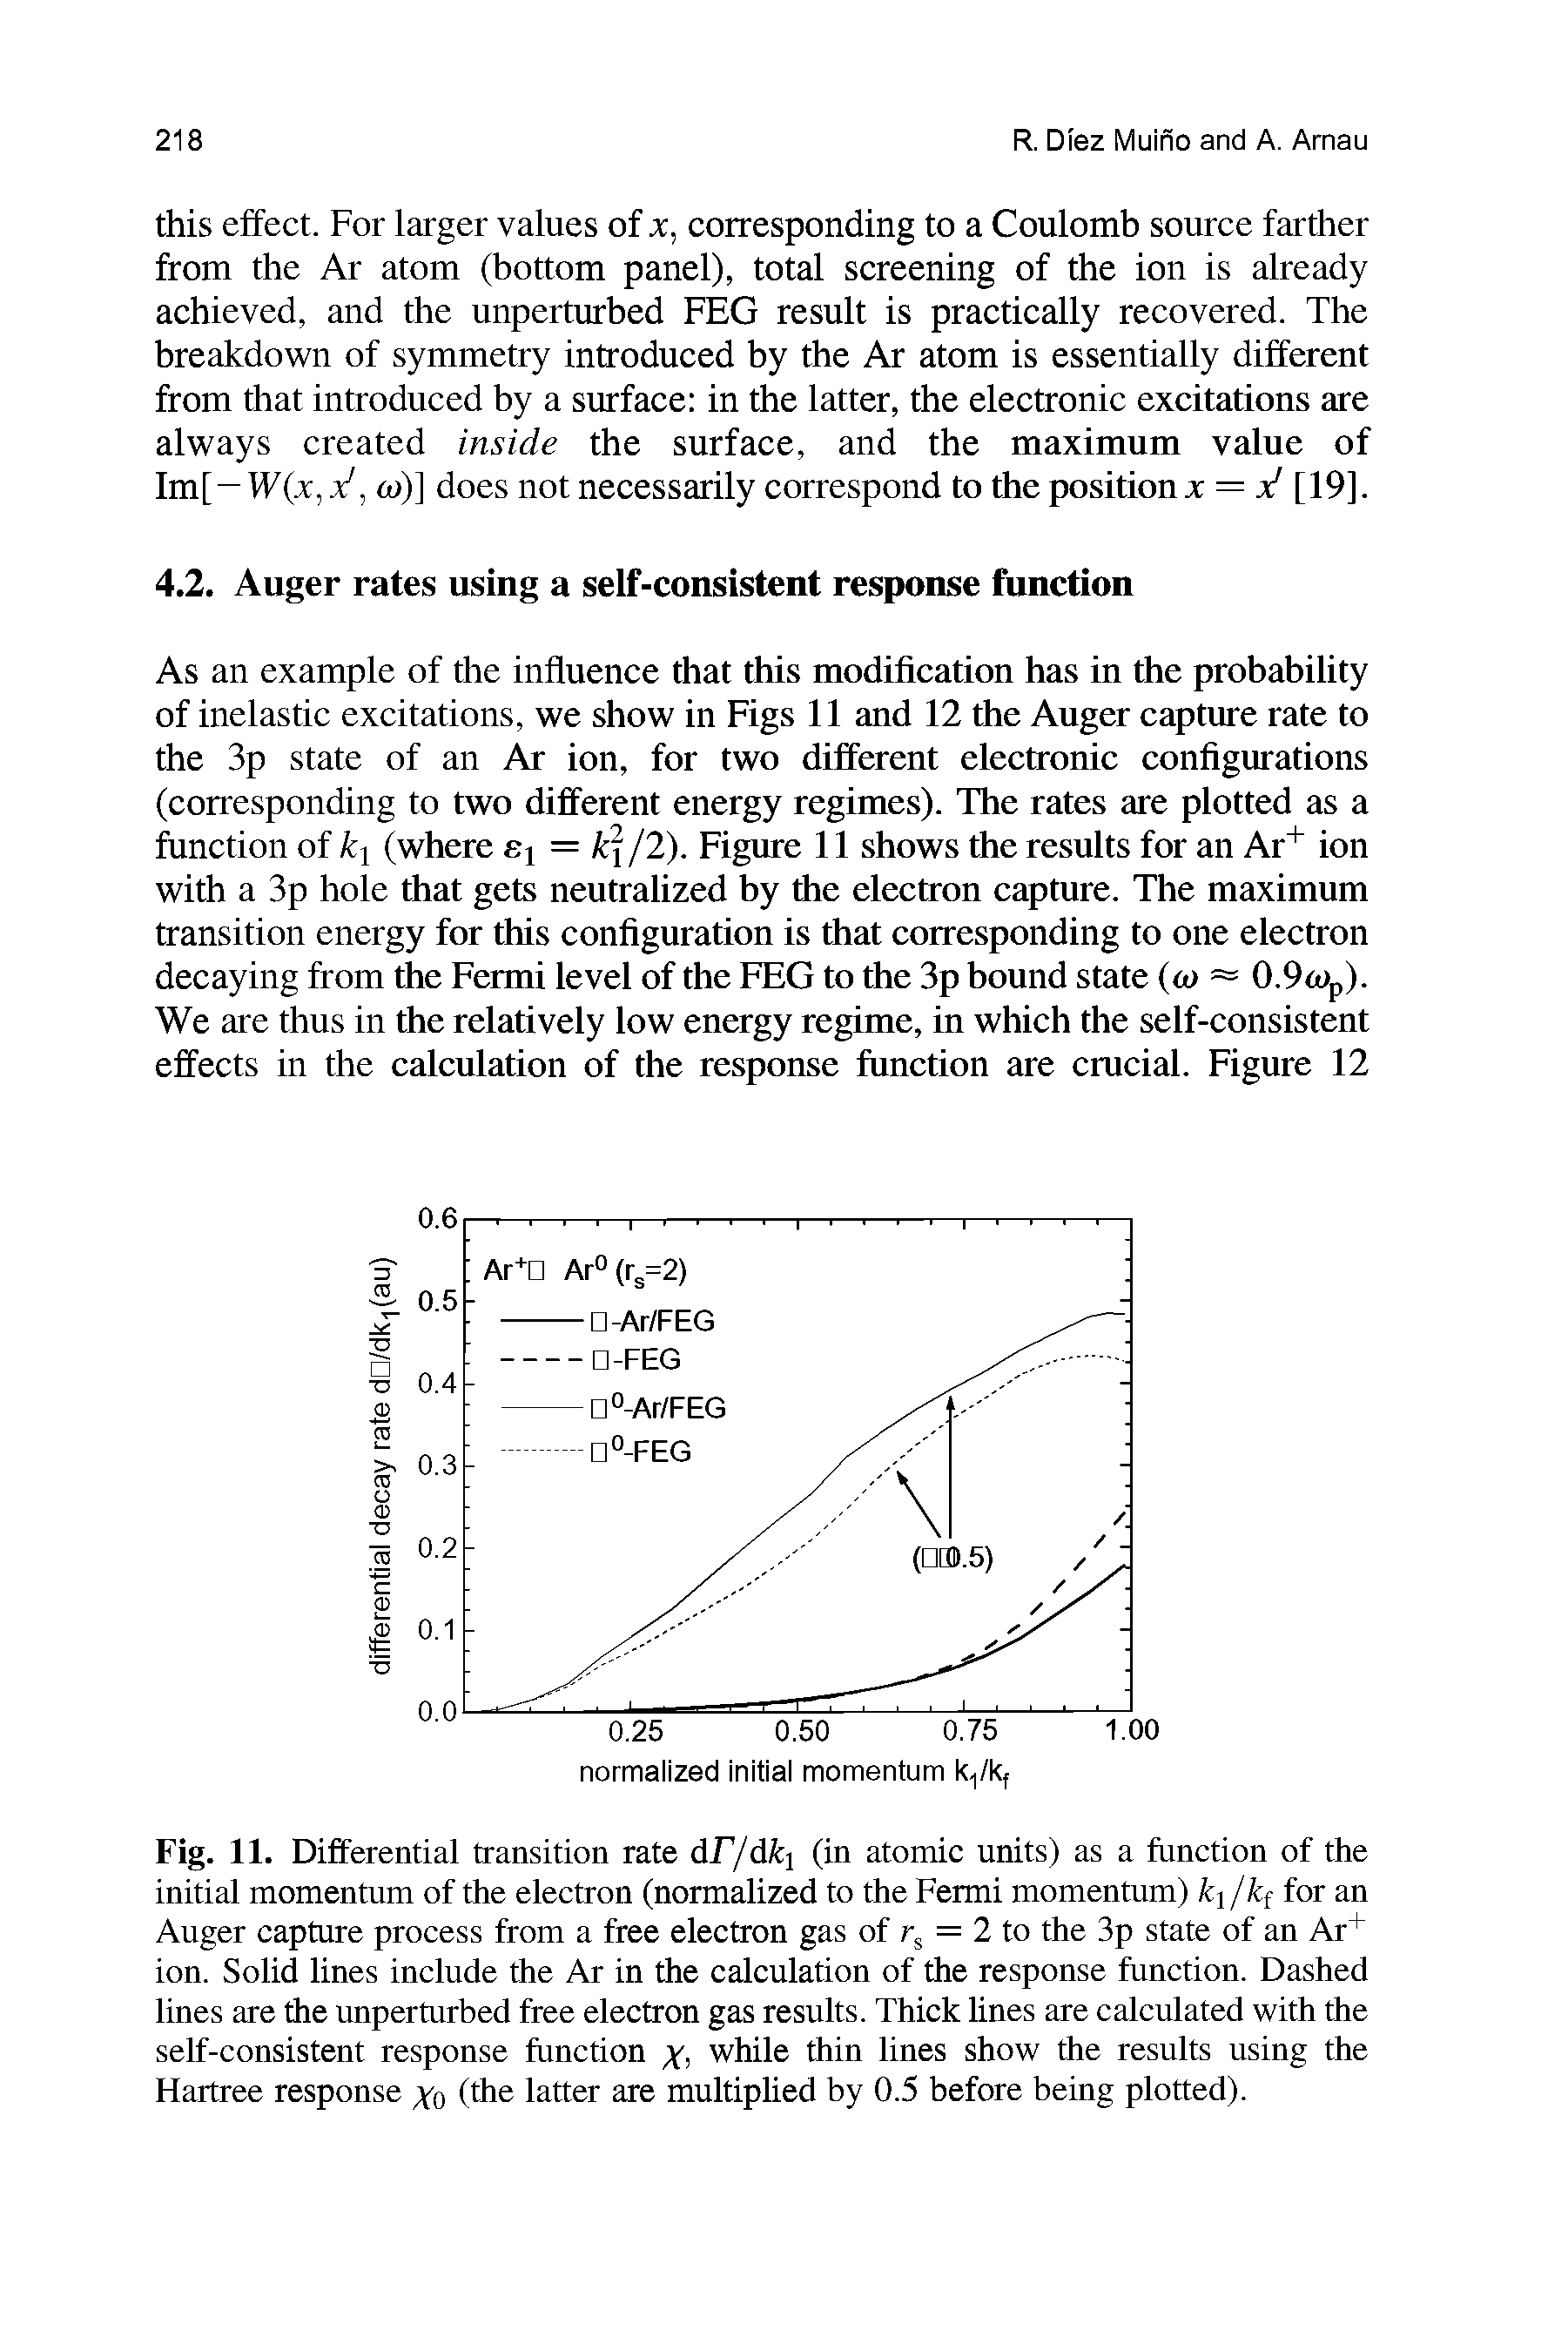 Fig. 11. Differential transition rate AF/Ak (in atomic units) as a function of the initial momentum of the electron (normalized to the Fermi momentum) fej /fef for an Auger capture process from a free electron gas of = 2 to the 3p state of an Ar ion. Solid lines include the Ar in the calculation of the response function. Dashed lines are the unperturbed free electron gas results. Thick lines are calculated with the self-consistent response function while thin lines show the results using the Hartree response xq (the latter are multiplied by 0.5 before being plotted).